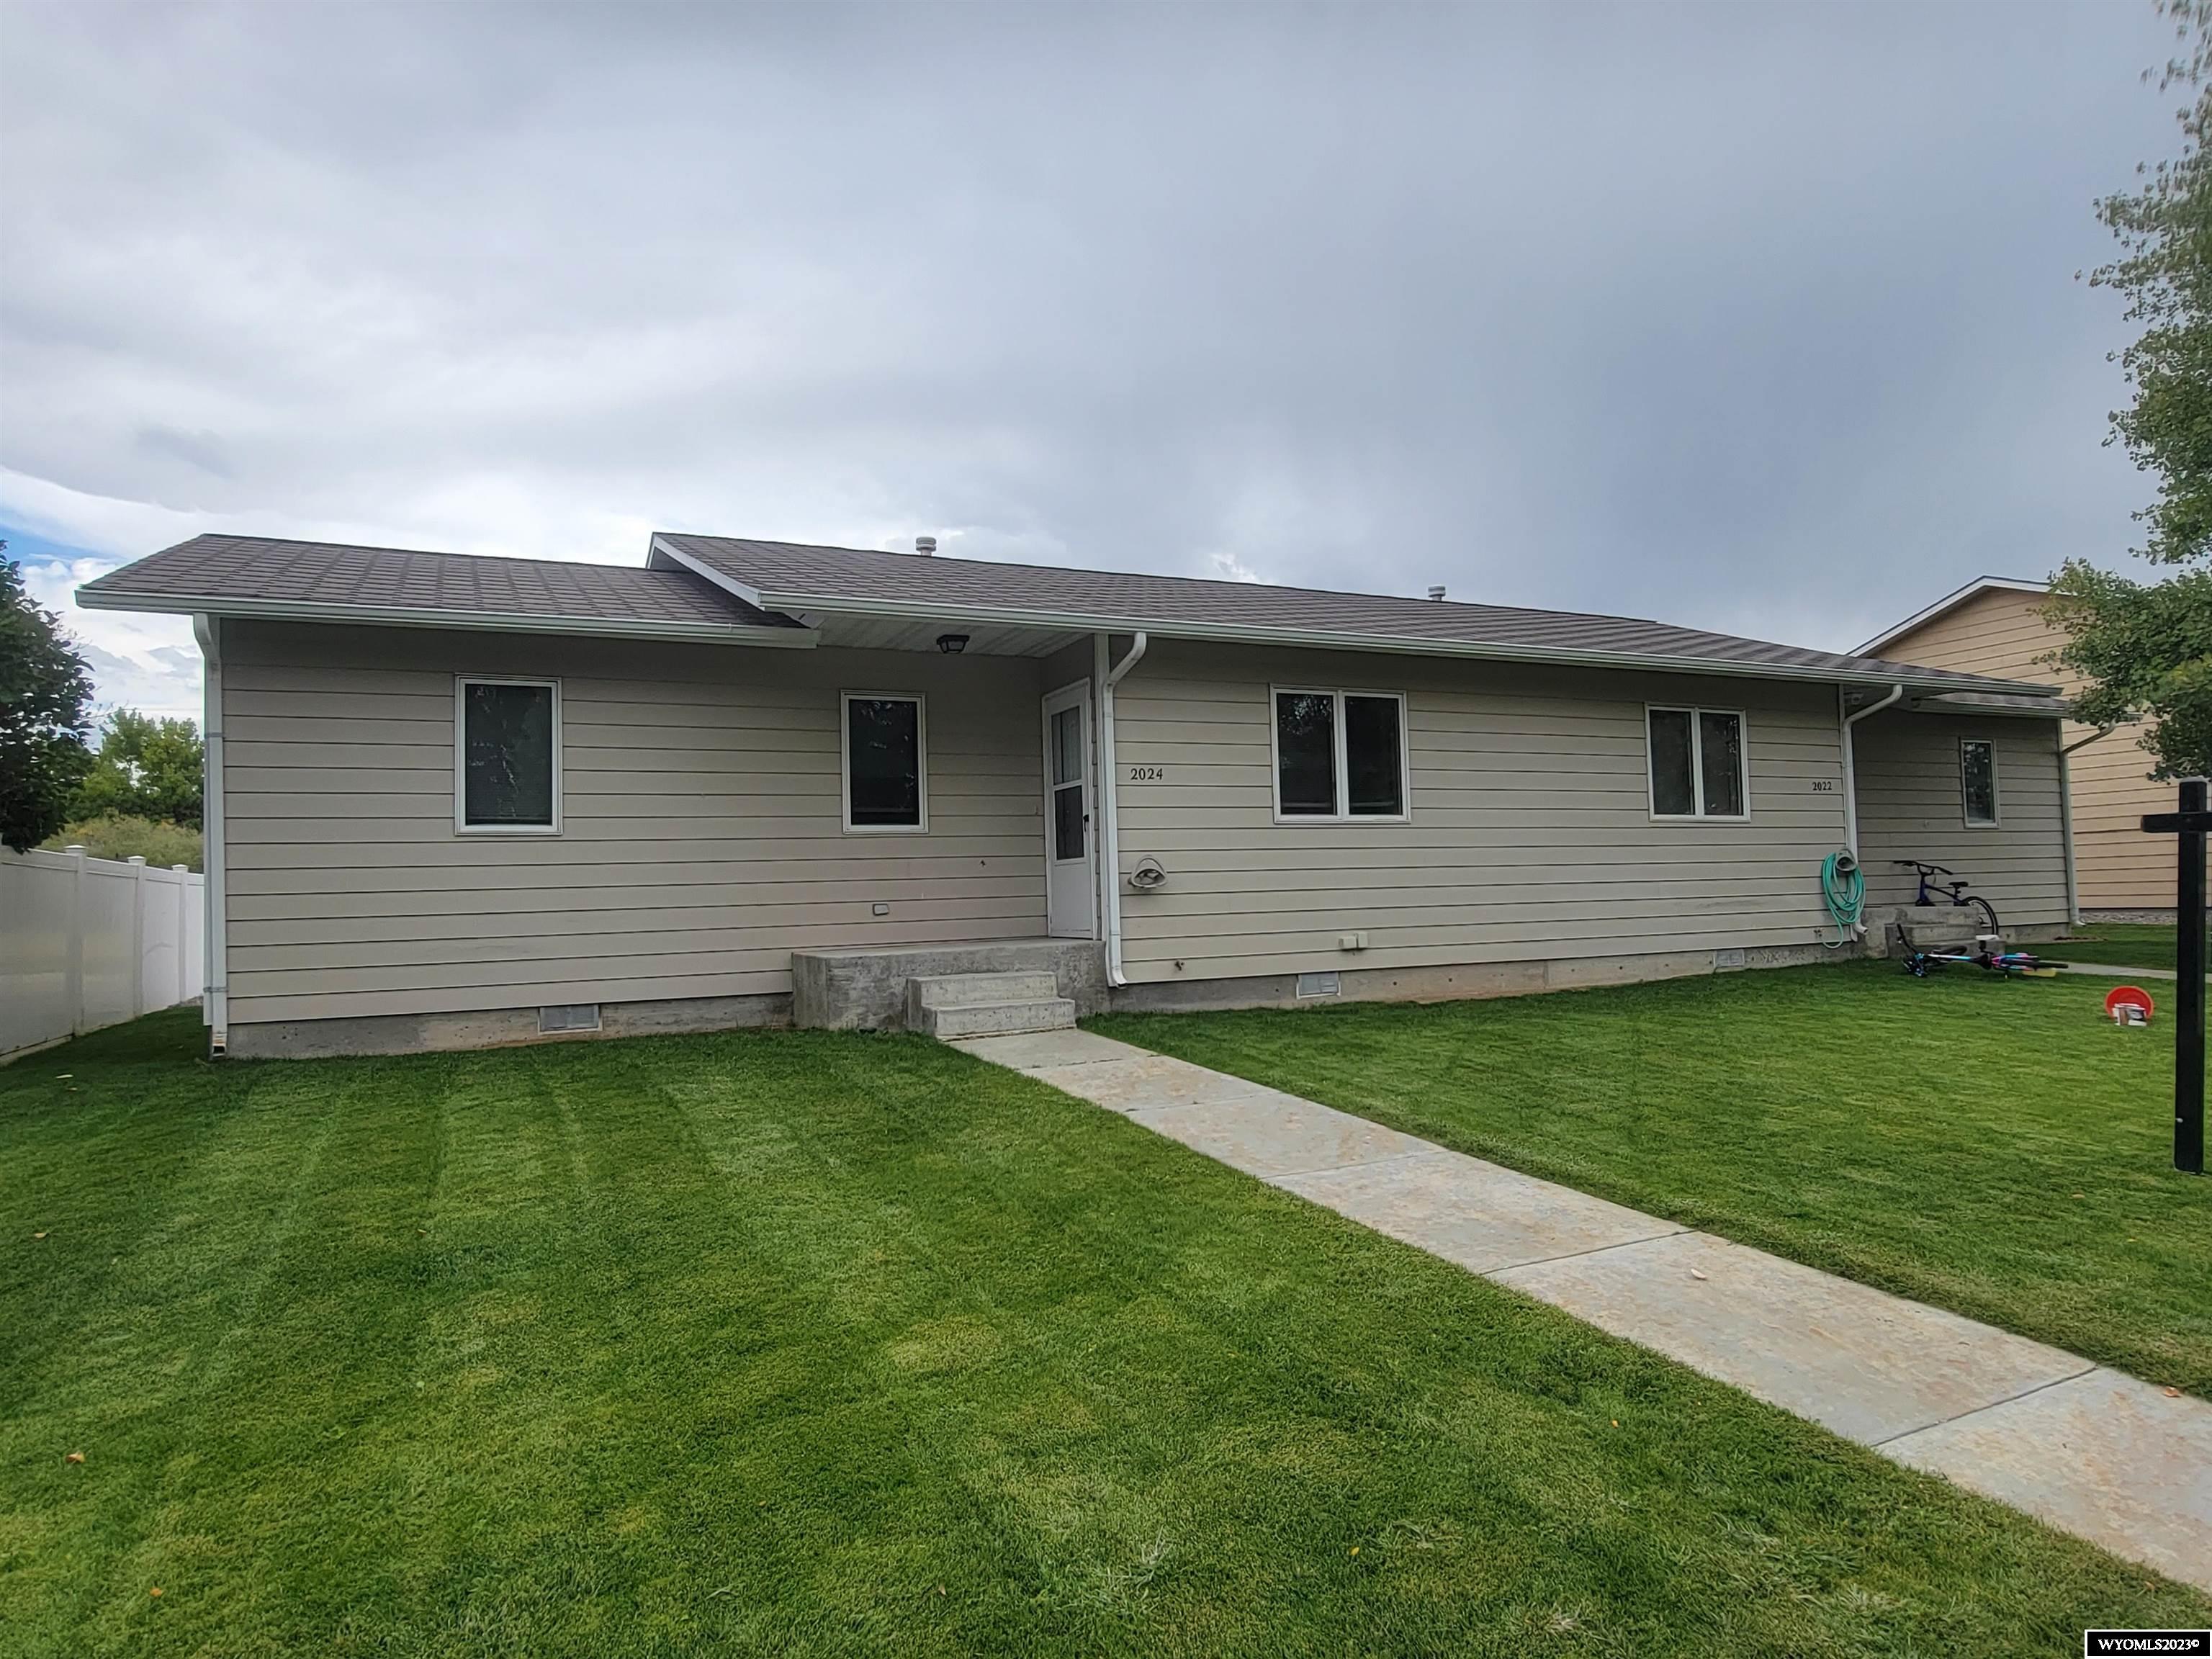 Great 3 bedroom 1 1/2 bath duplex. Rent is currently $700.00 per unit per month with renter responsible for Gas & Electric.  Seller is currently paying for City of Worland Utilities which include water & trash.  The 2nd unit is rented for $800/month, renteer pays gas & electric.  6 month lease